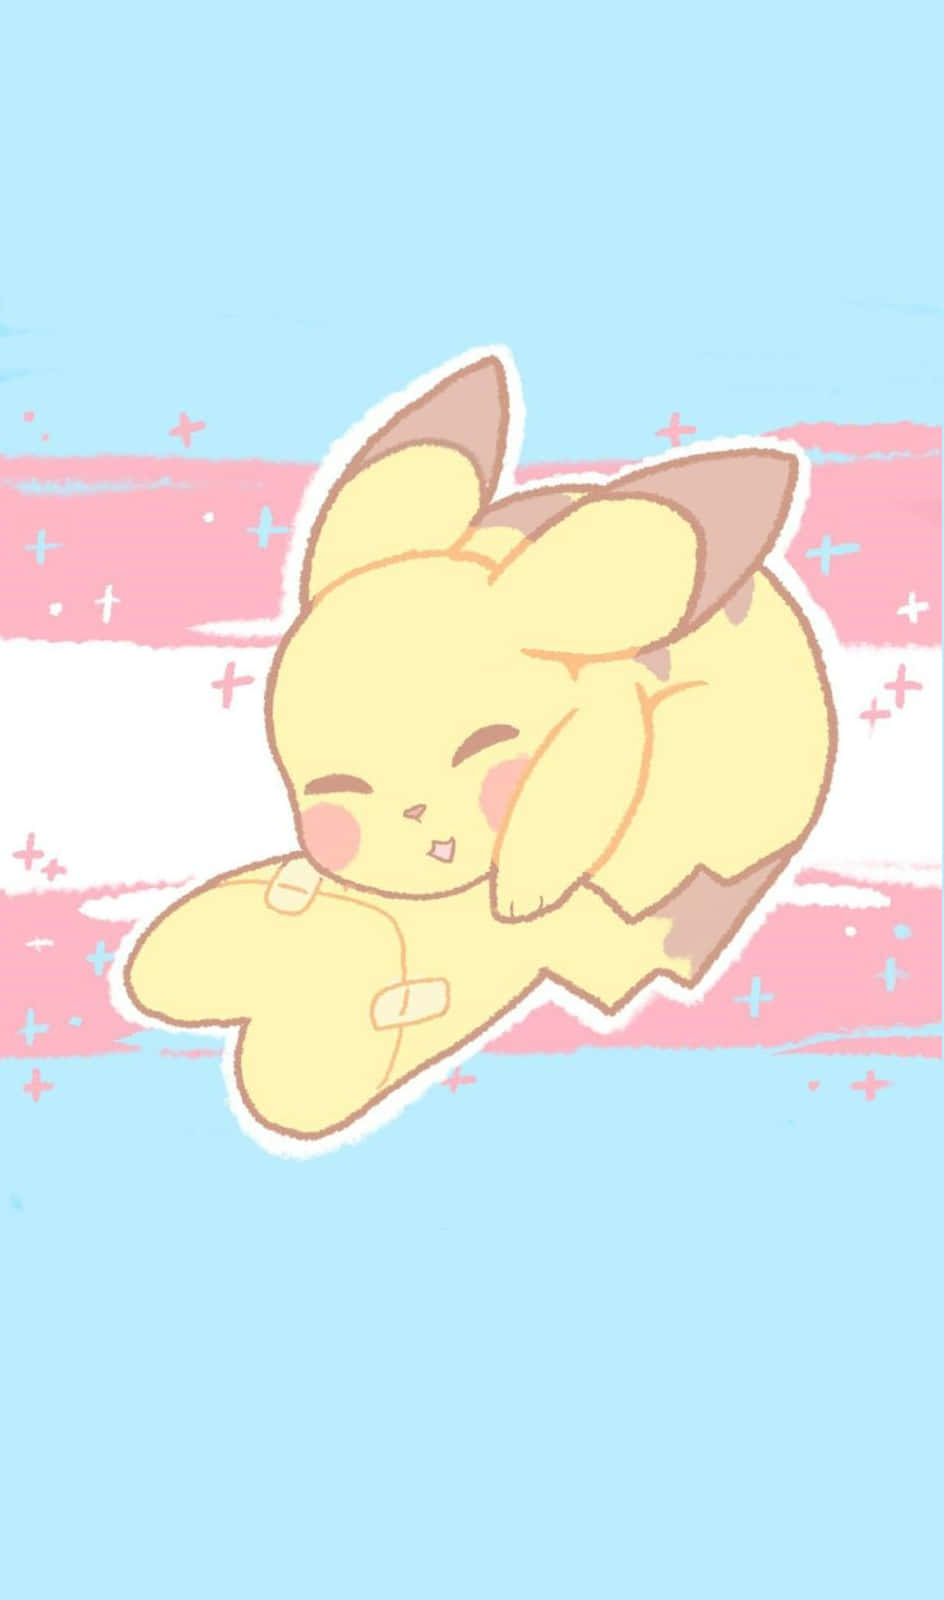 A Cute Pikachu Sleeping On A Pink And Blue Background Wallpaper